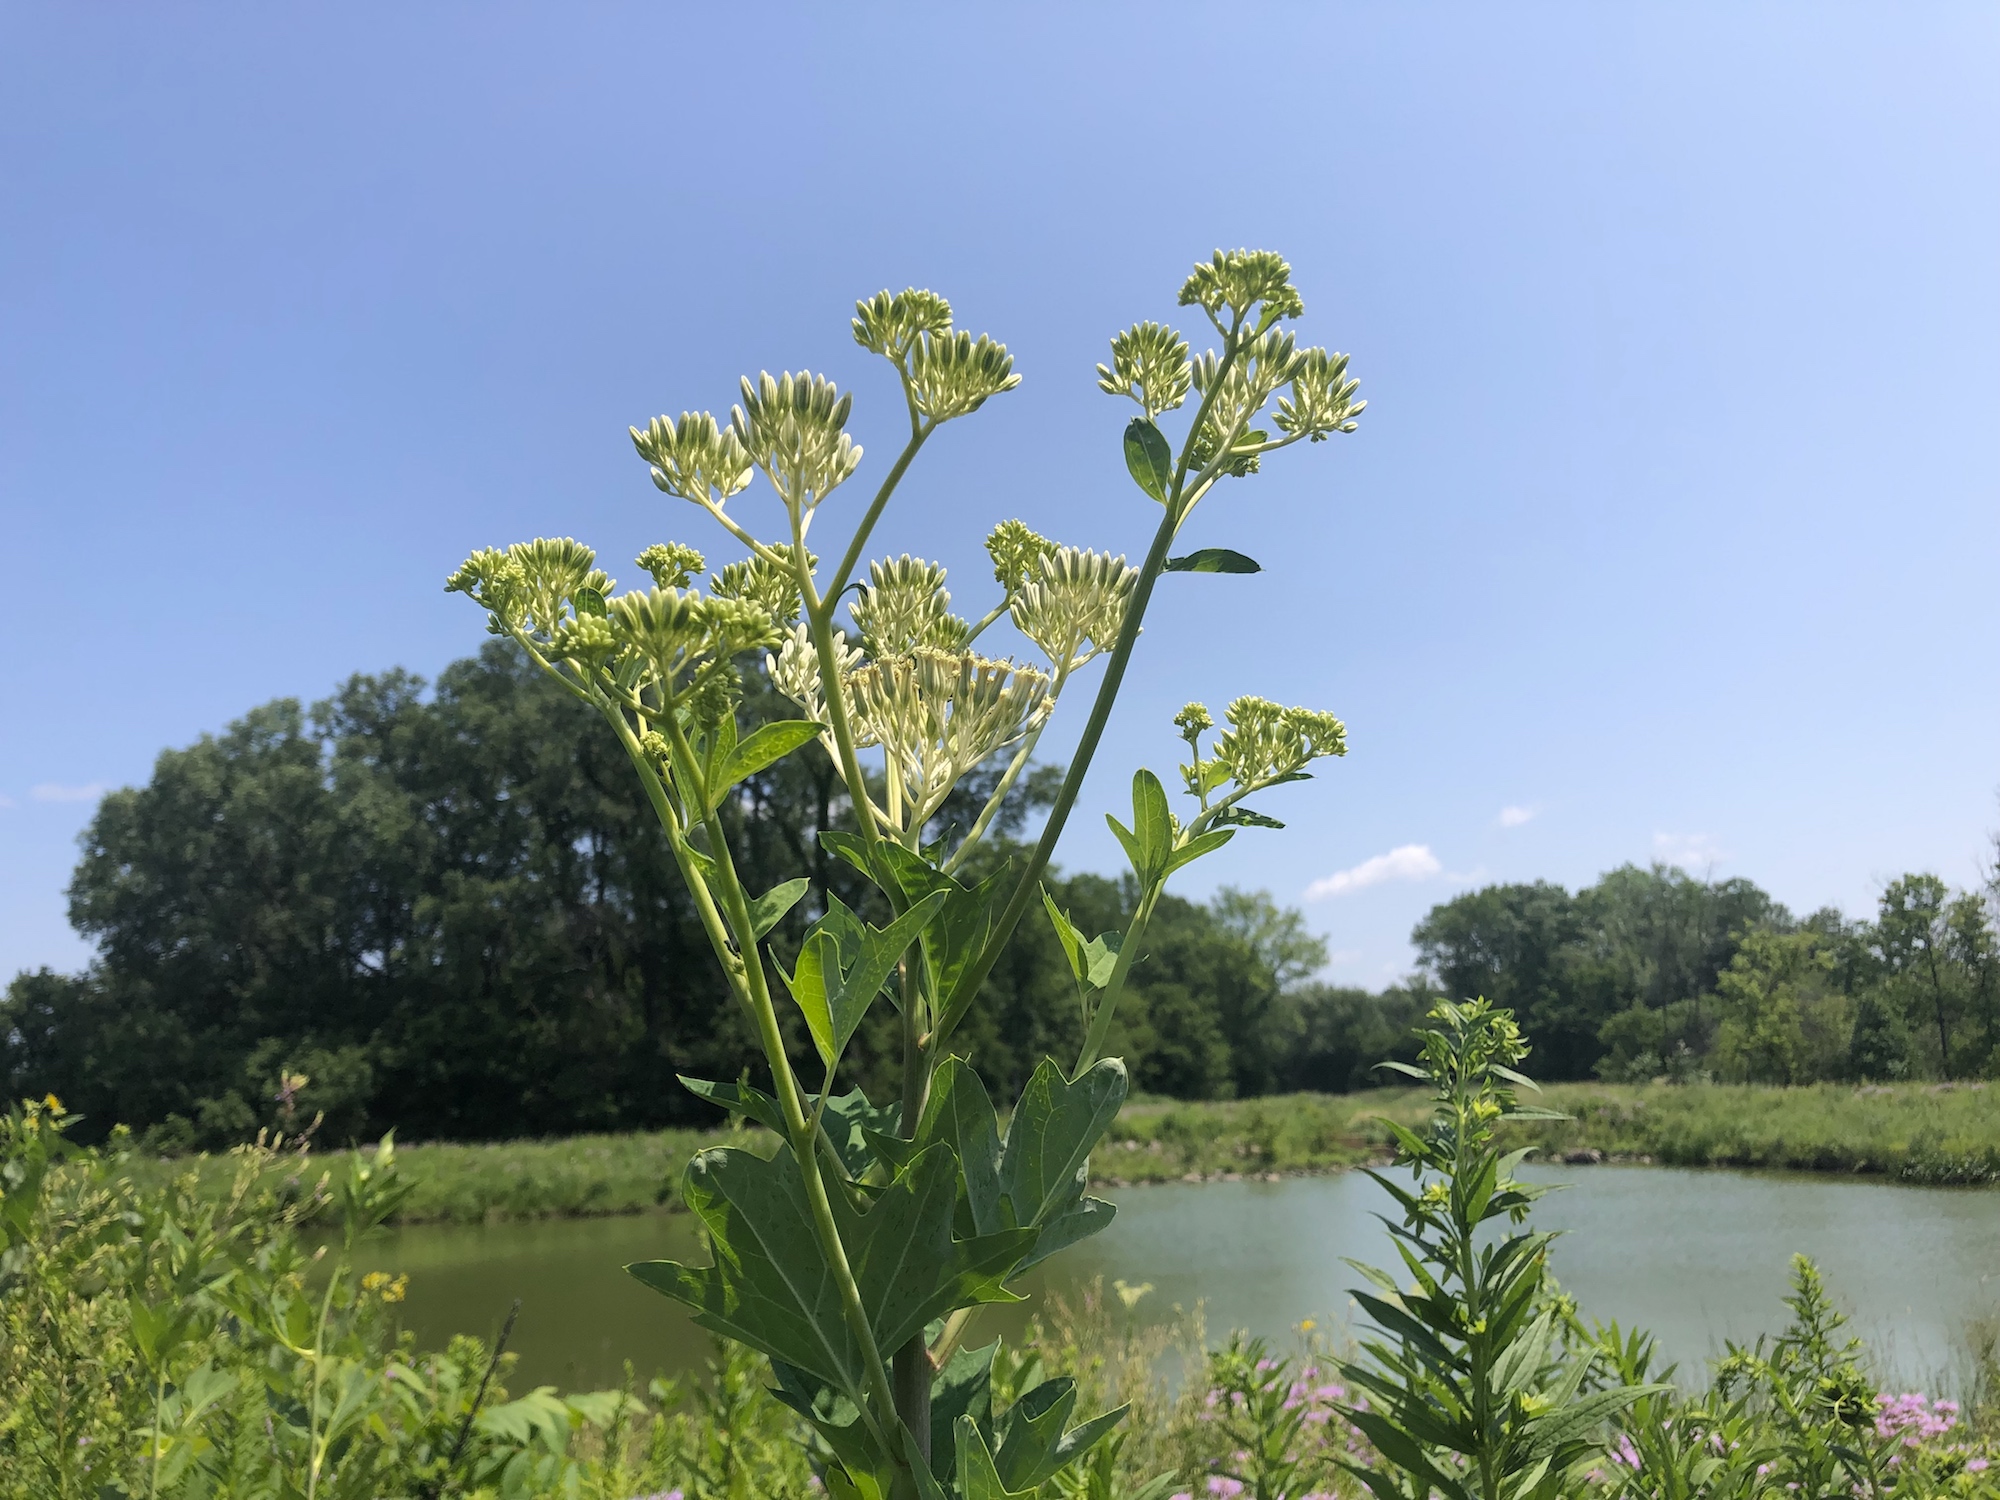 Pale Indian Plantain on bank of retaining pond on corner of Nakoma Road and Manitou Way on July 23 2019.